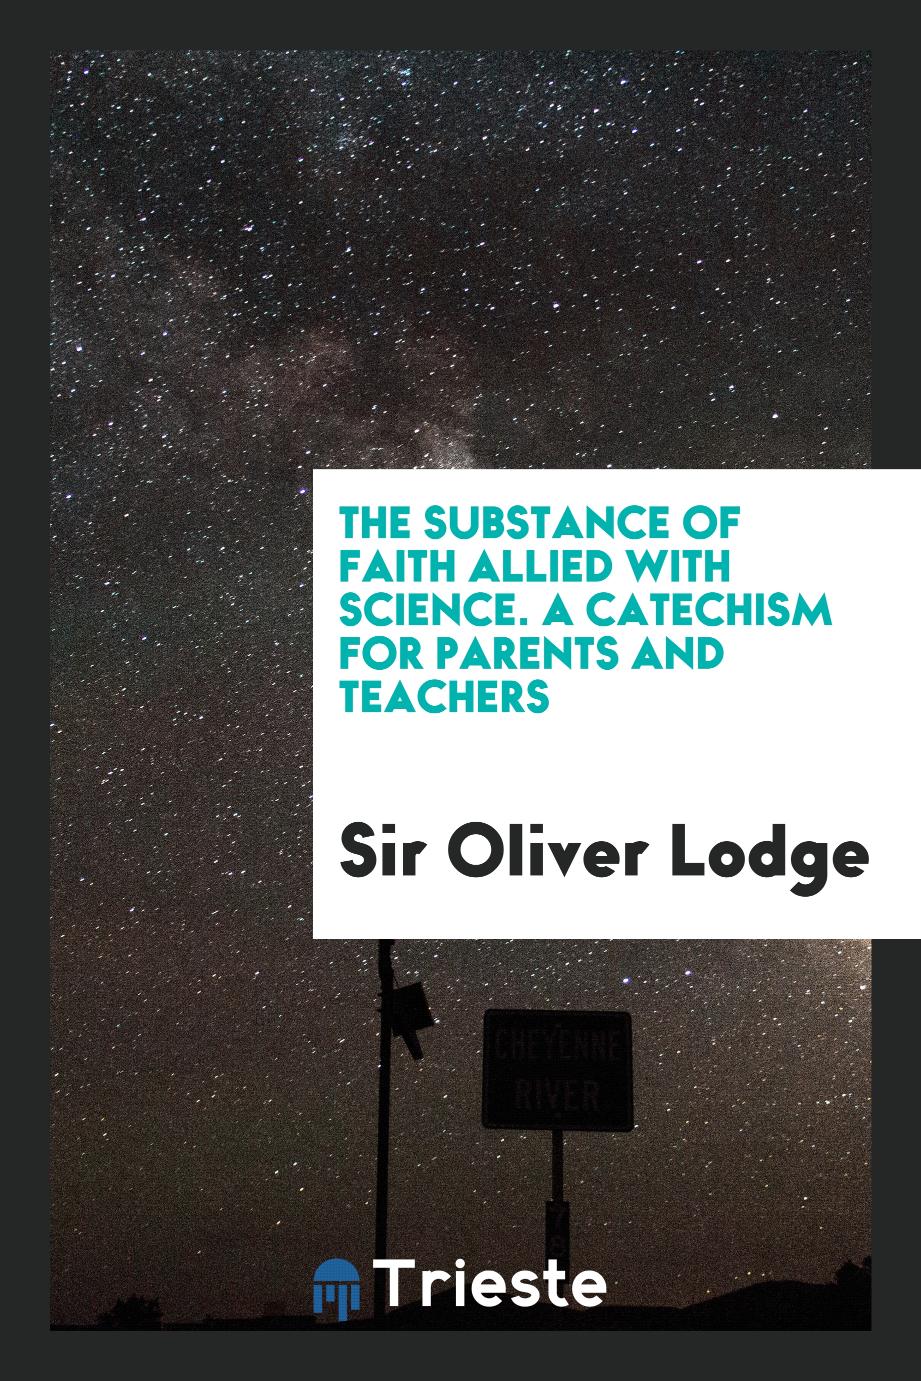 Sir Oliver Lodge - The substance of faith allied with science. A catechism for parents and teachers